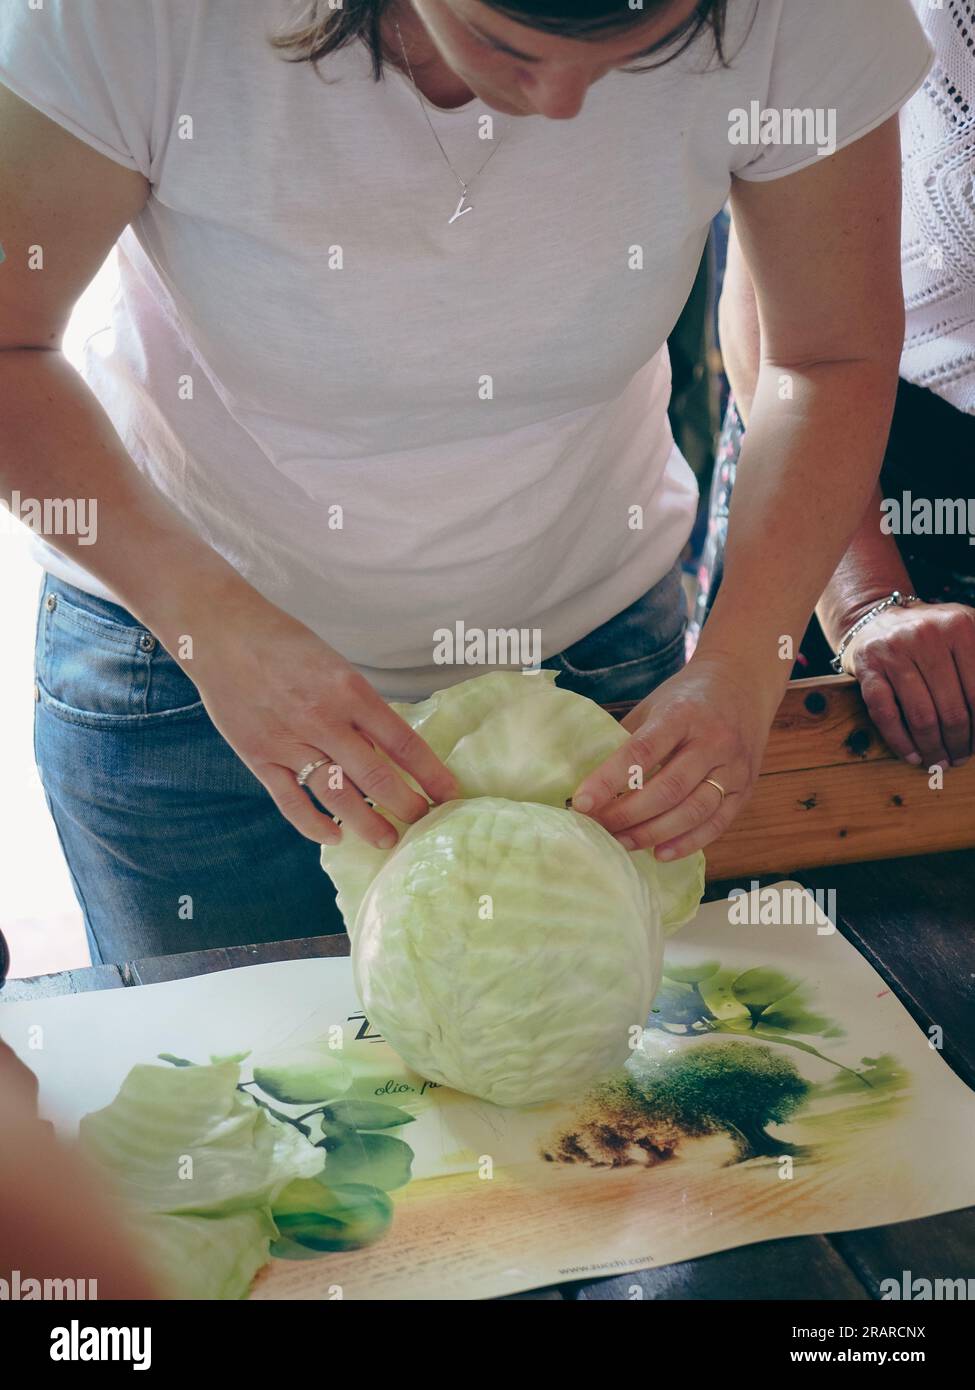 woman cutting and kneading cabbage leaves to make a compress to lower body part inflammation. Natural home made italian antique remedies concept. Stock Photo